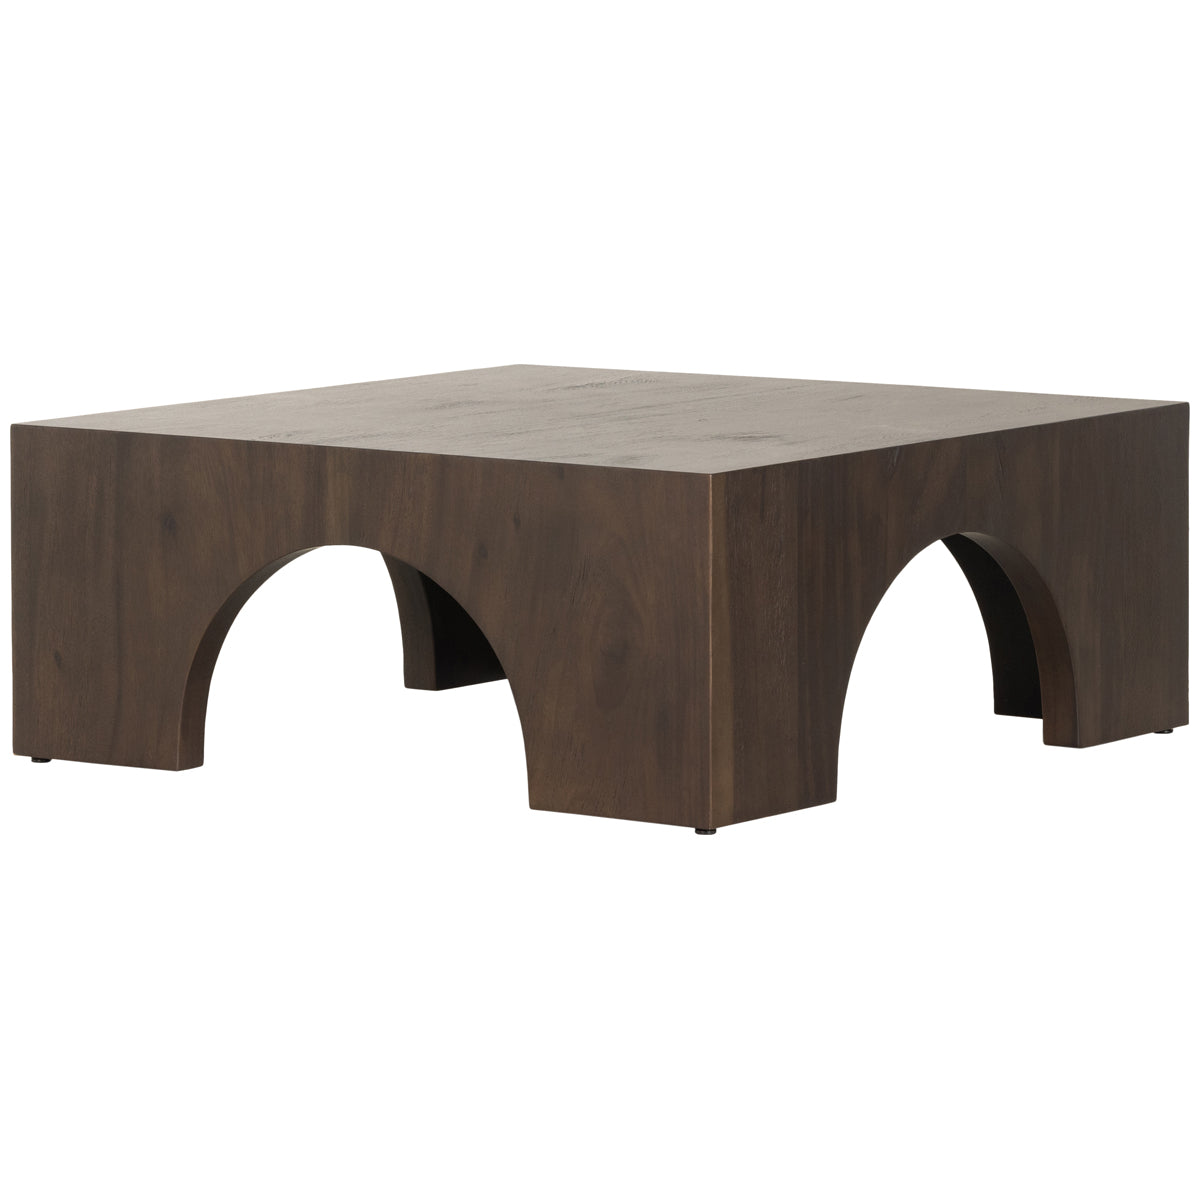 Four Hands Wesson Fausto Coffee Table - Smoked Guanacaste